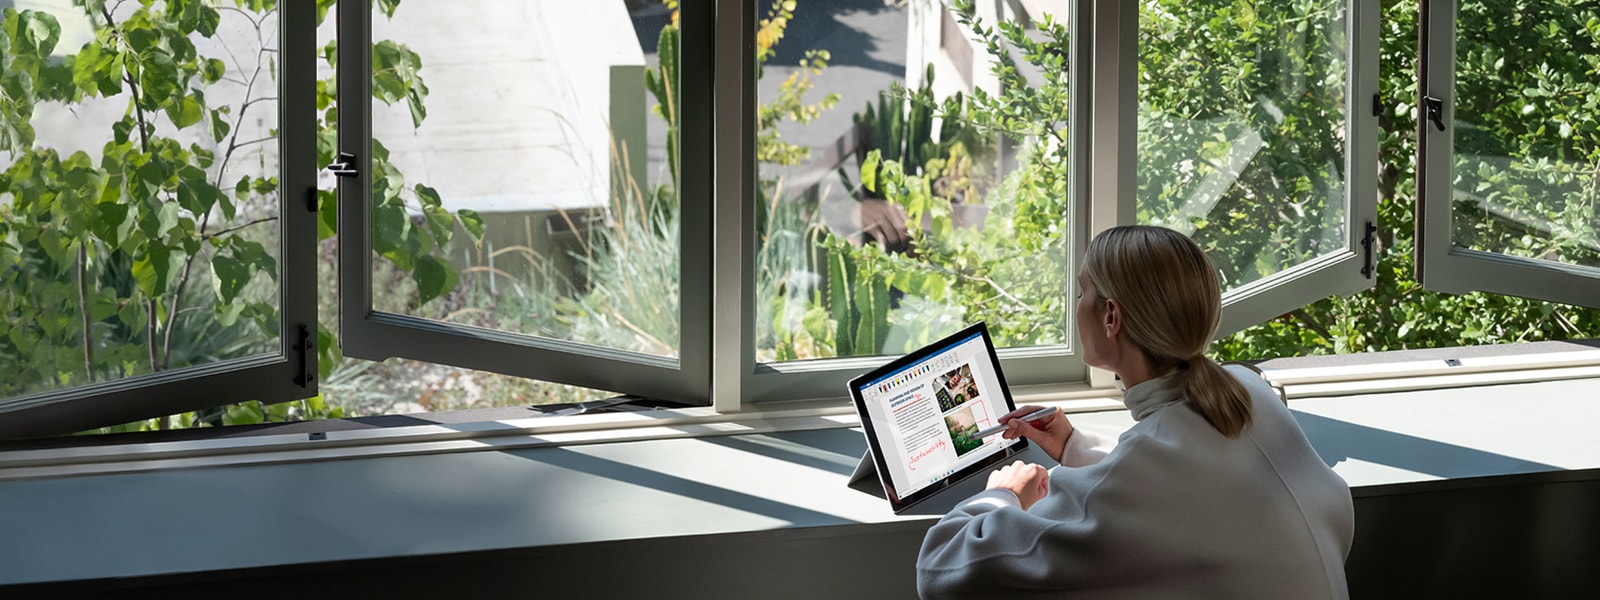 A woman sitting near bright open windows with a view of green plants and working on a Microsoft Surface Laptop.